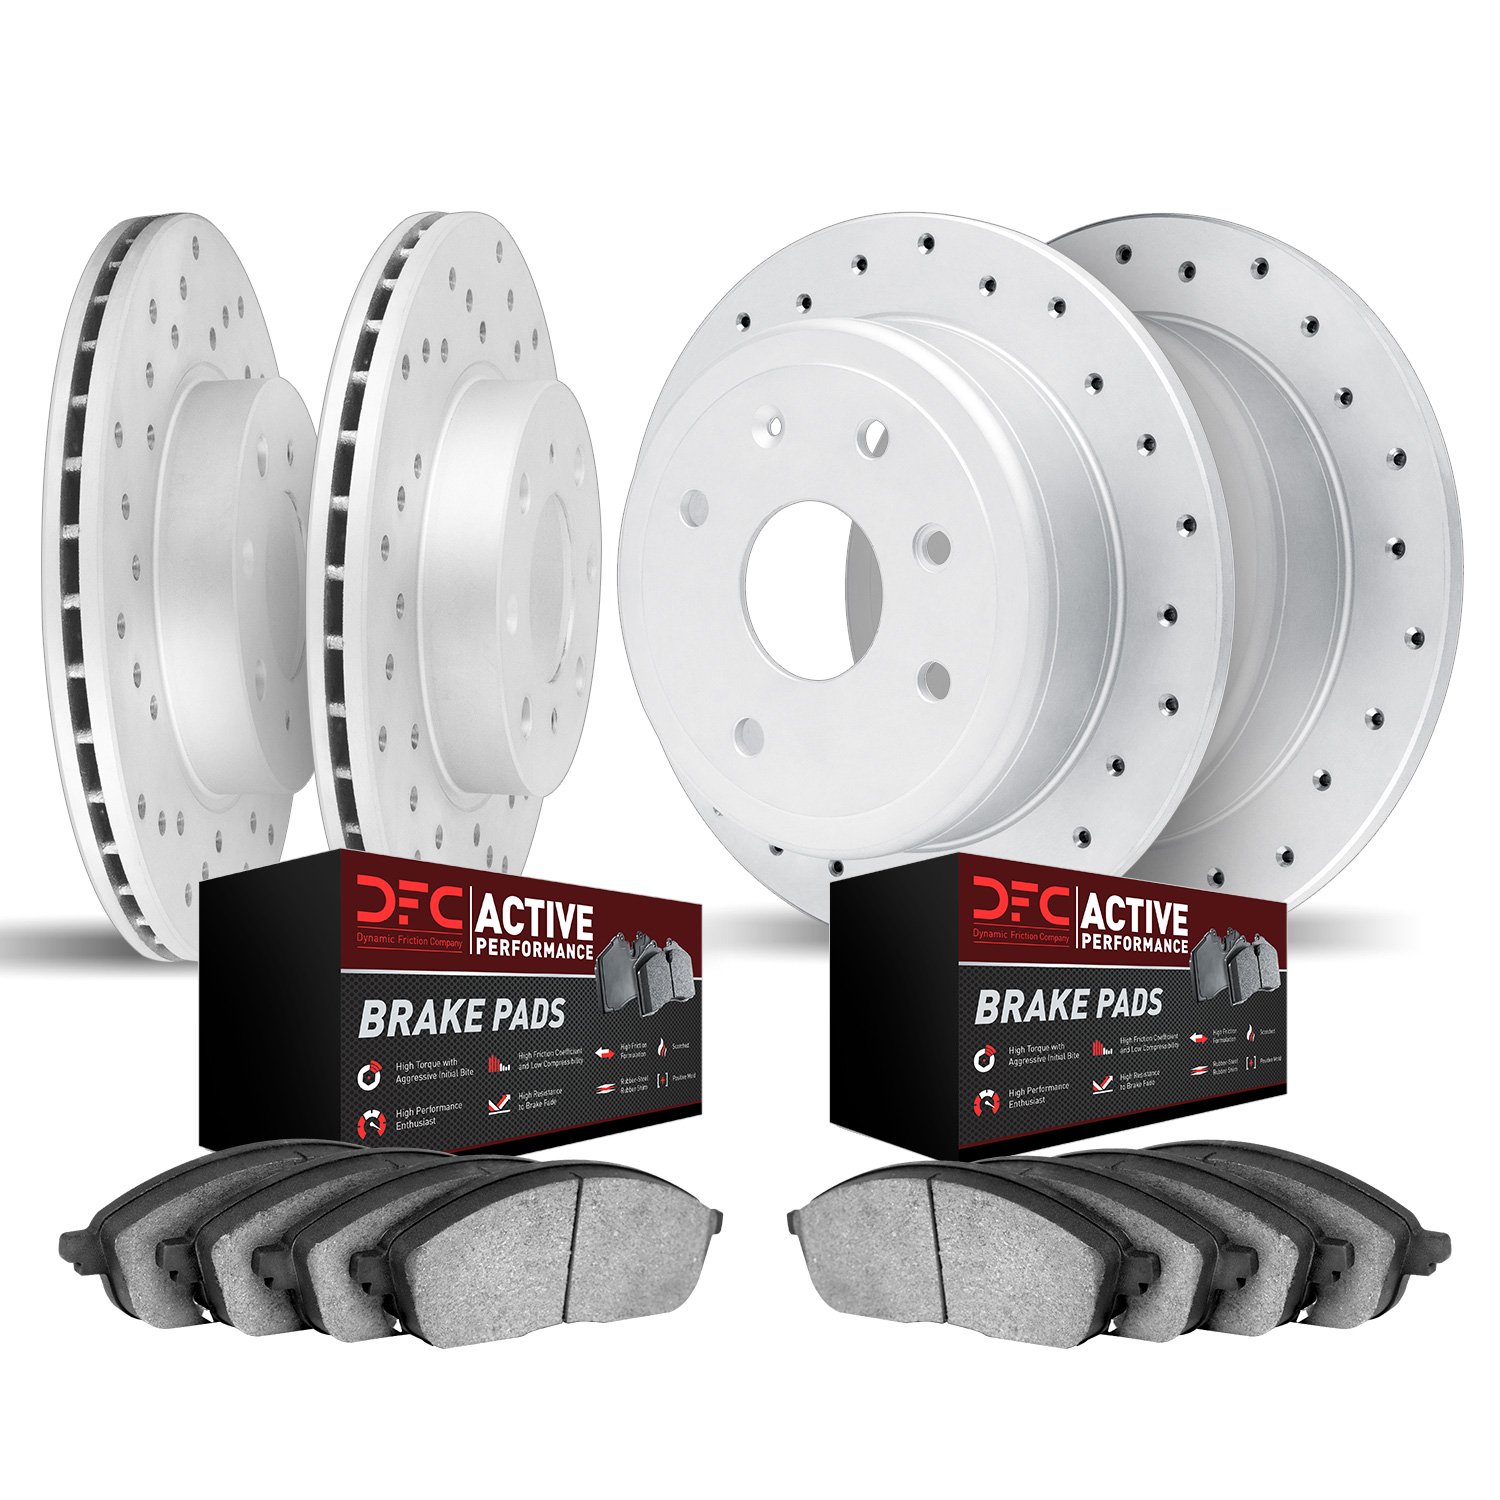 2704-59002 Geoperformance Drilled Brake Rotors with Active Performance Pads Kit, 1993-2001 Acura/Honda, Position: Front and Rear